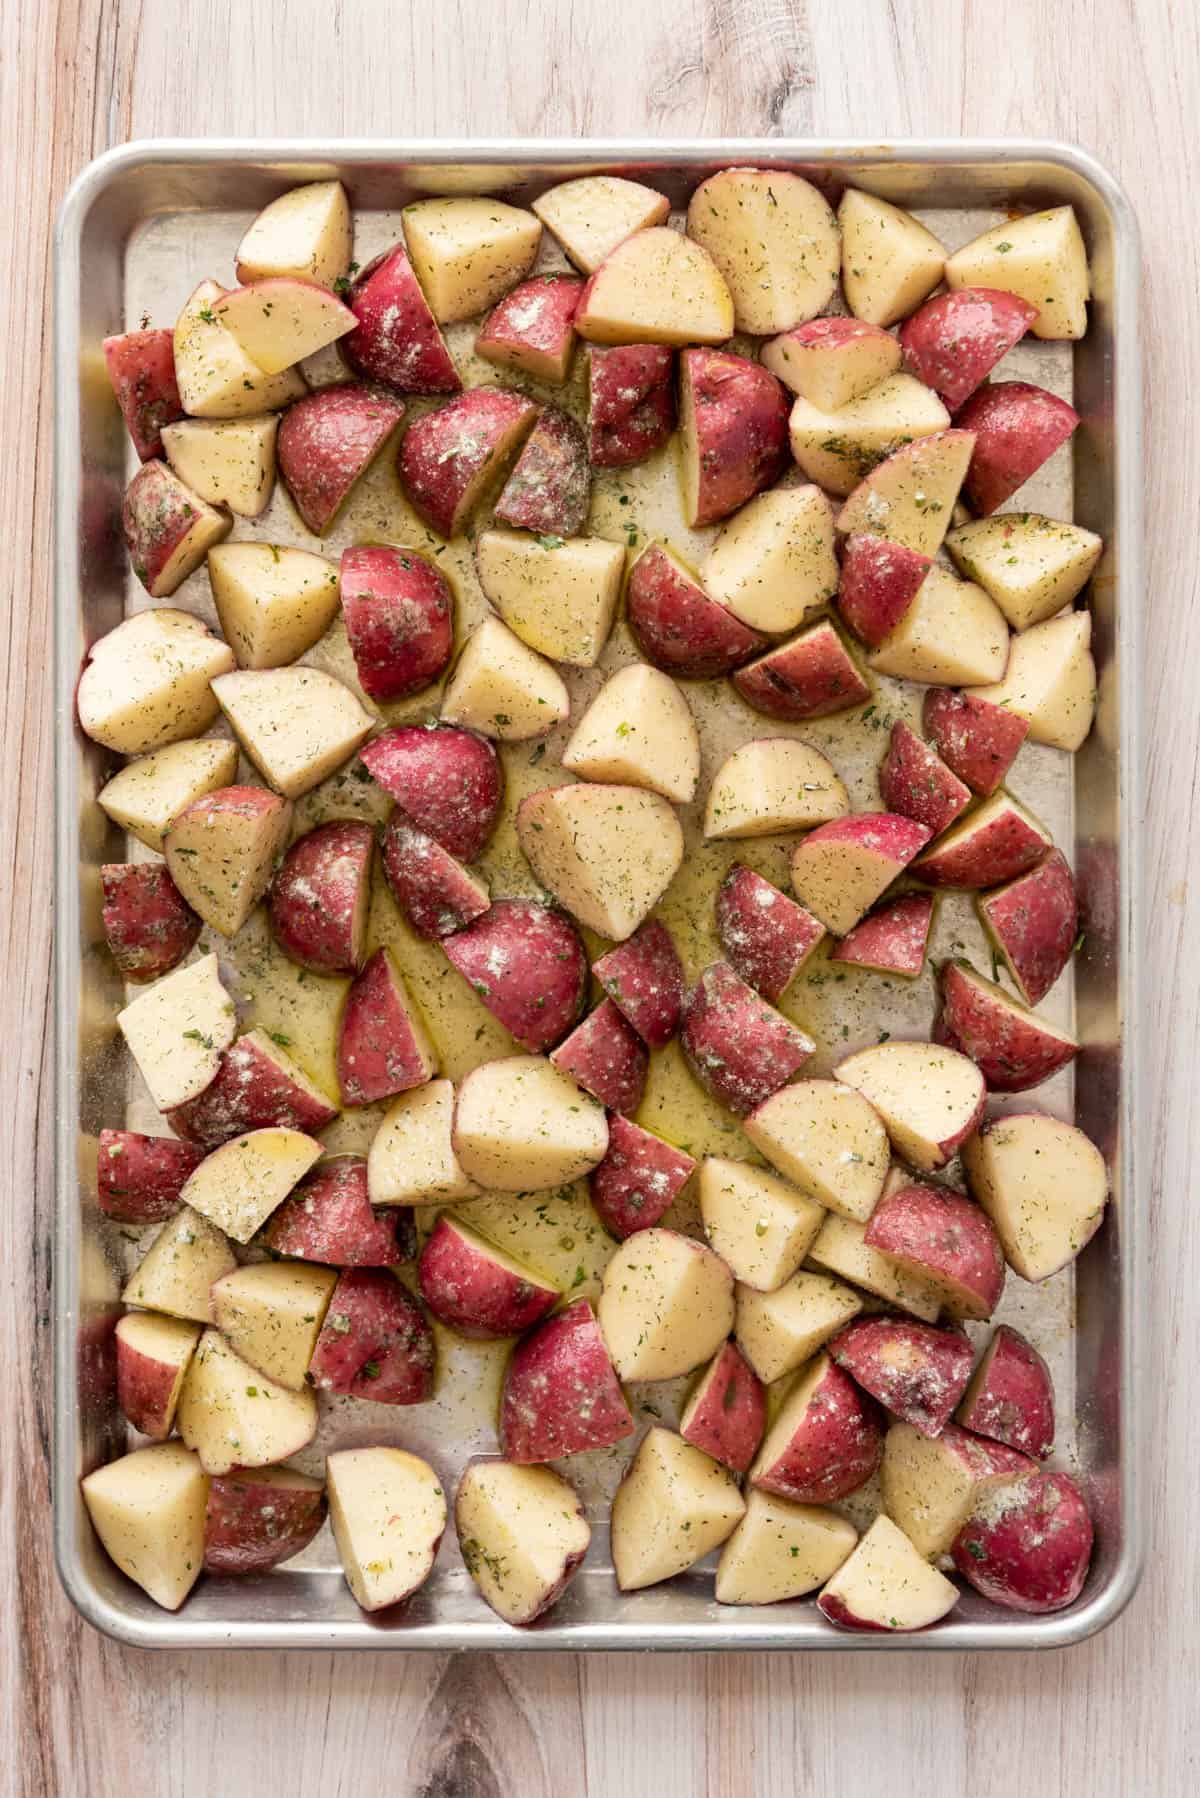 Quartered red potatoes tossed with olive oil and ranch seasoning on a baking sheet.